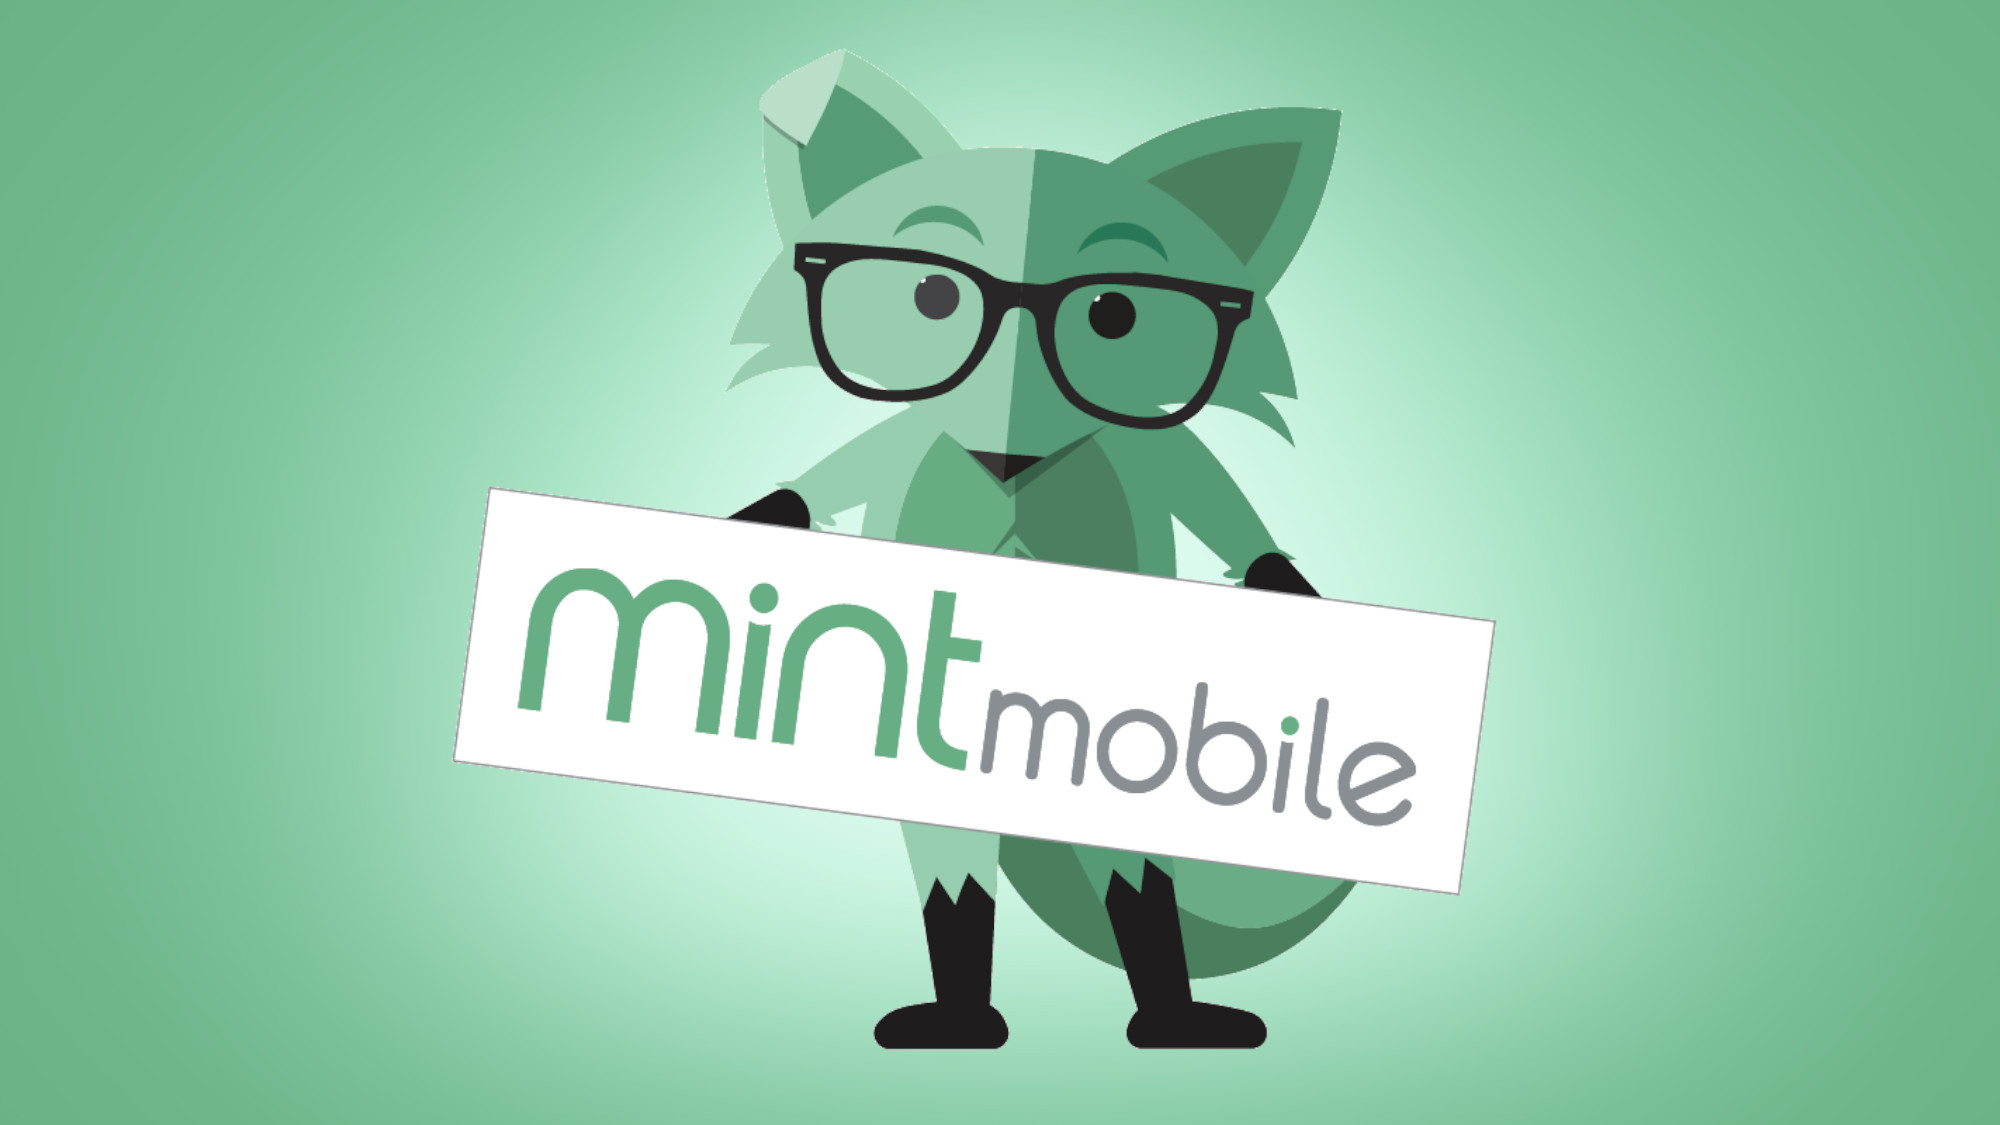 Is Mint Mobile good?